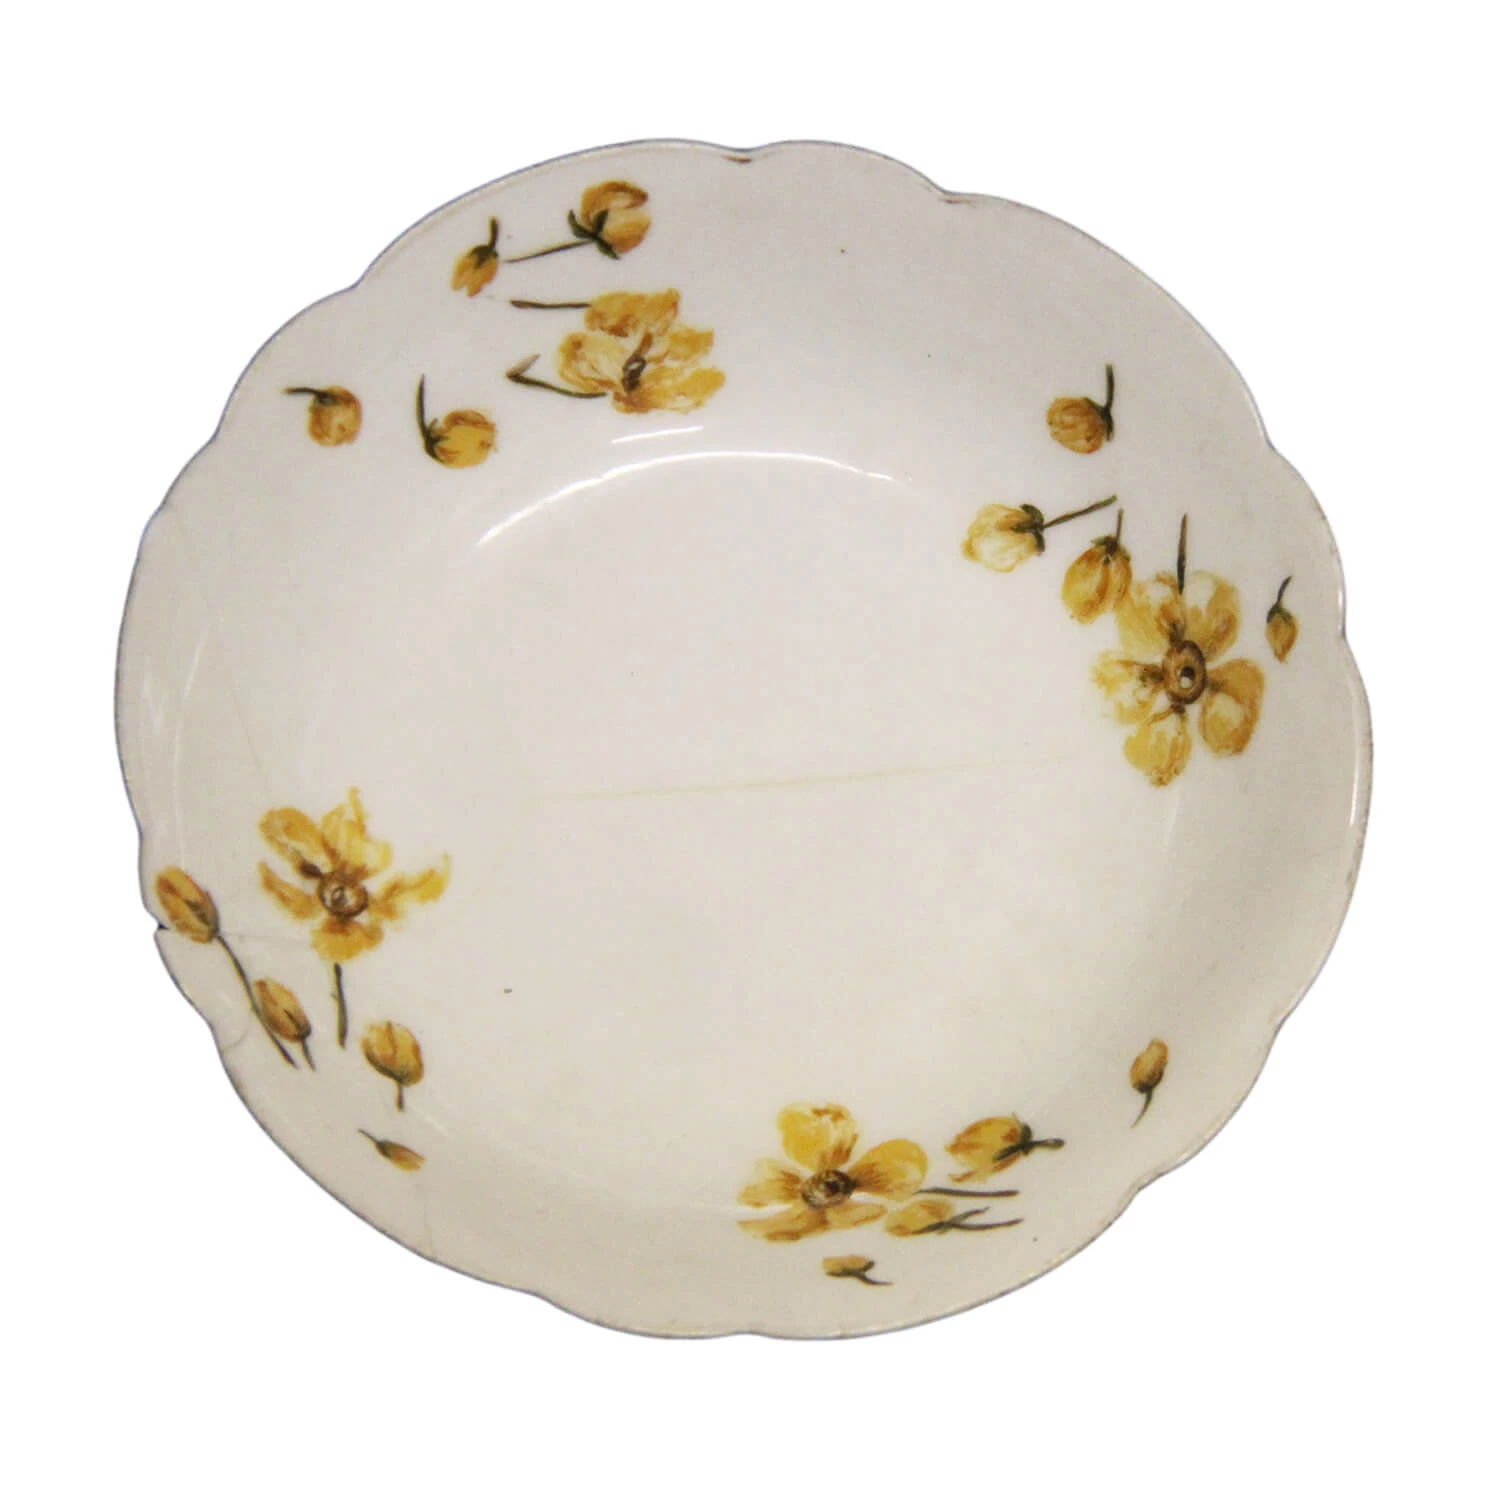 White bowl with ruffled edges, painted with yellow flowers.